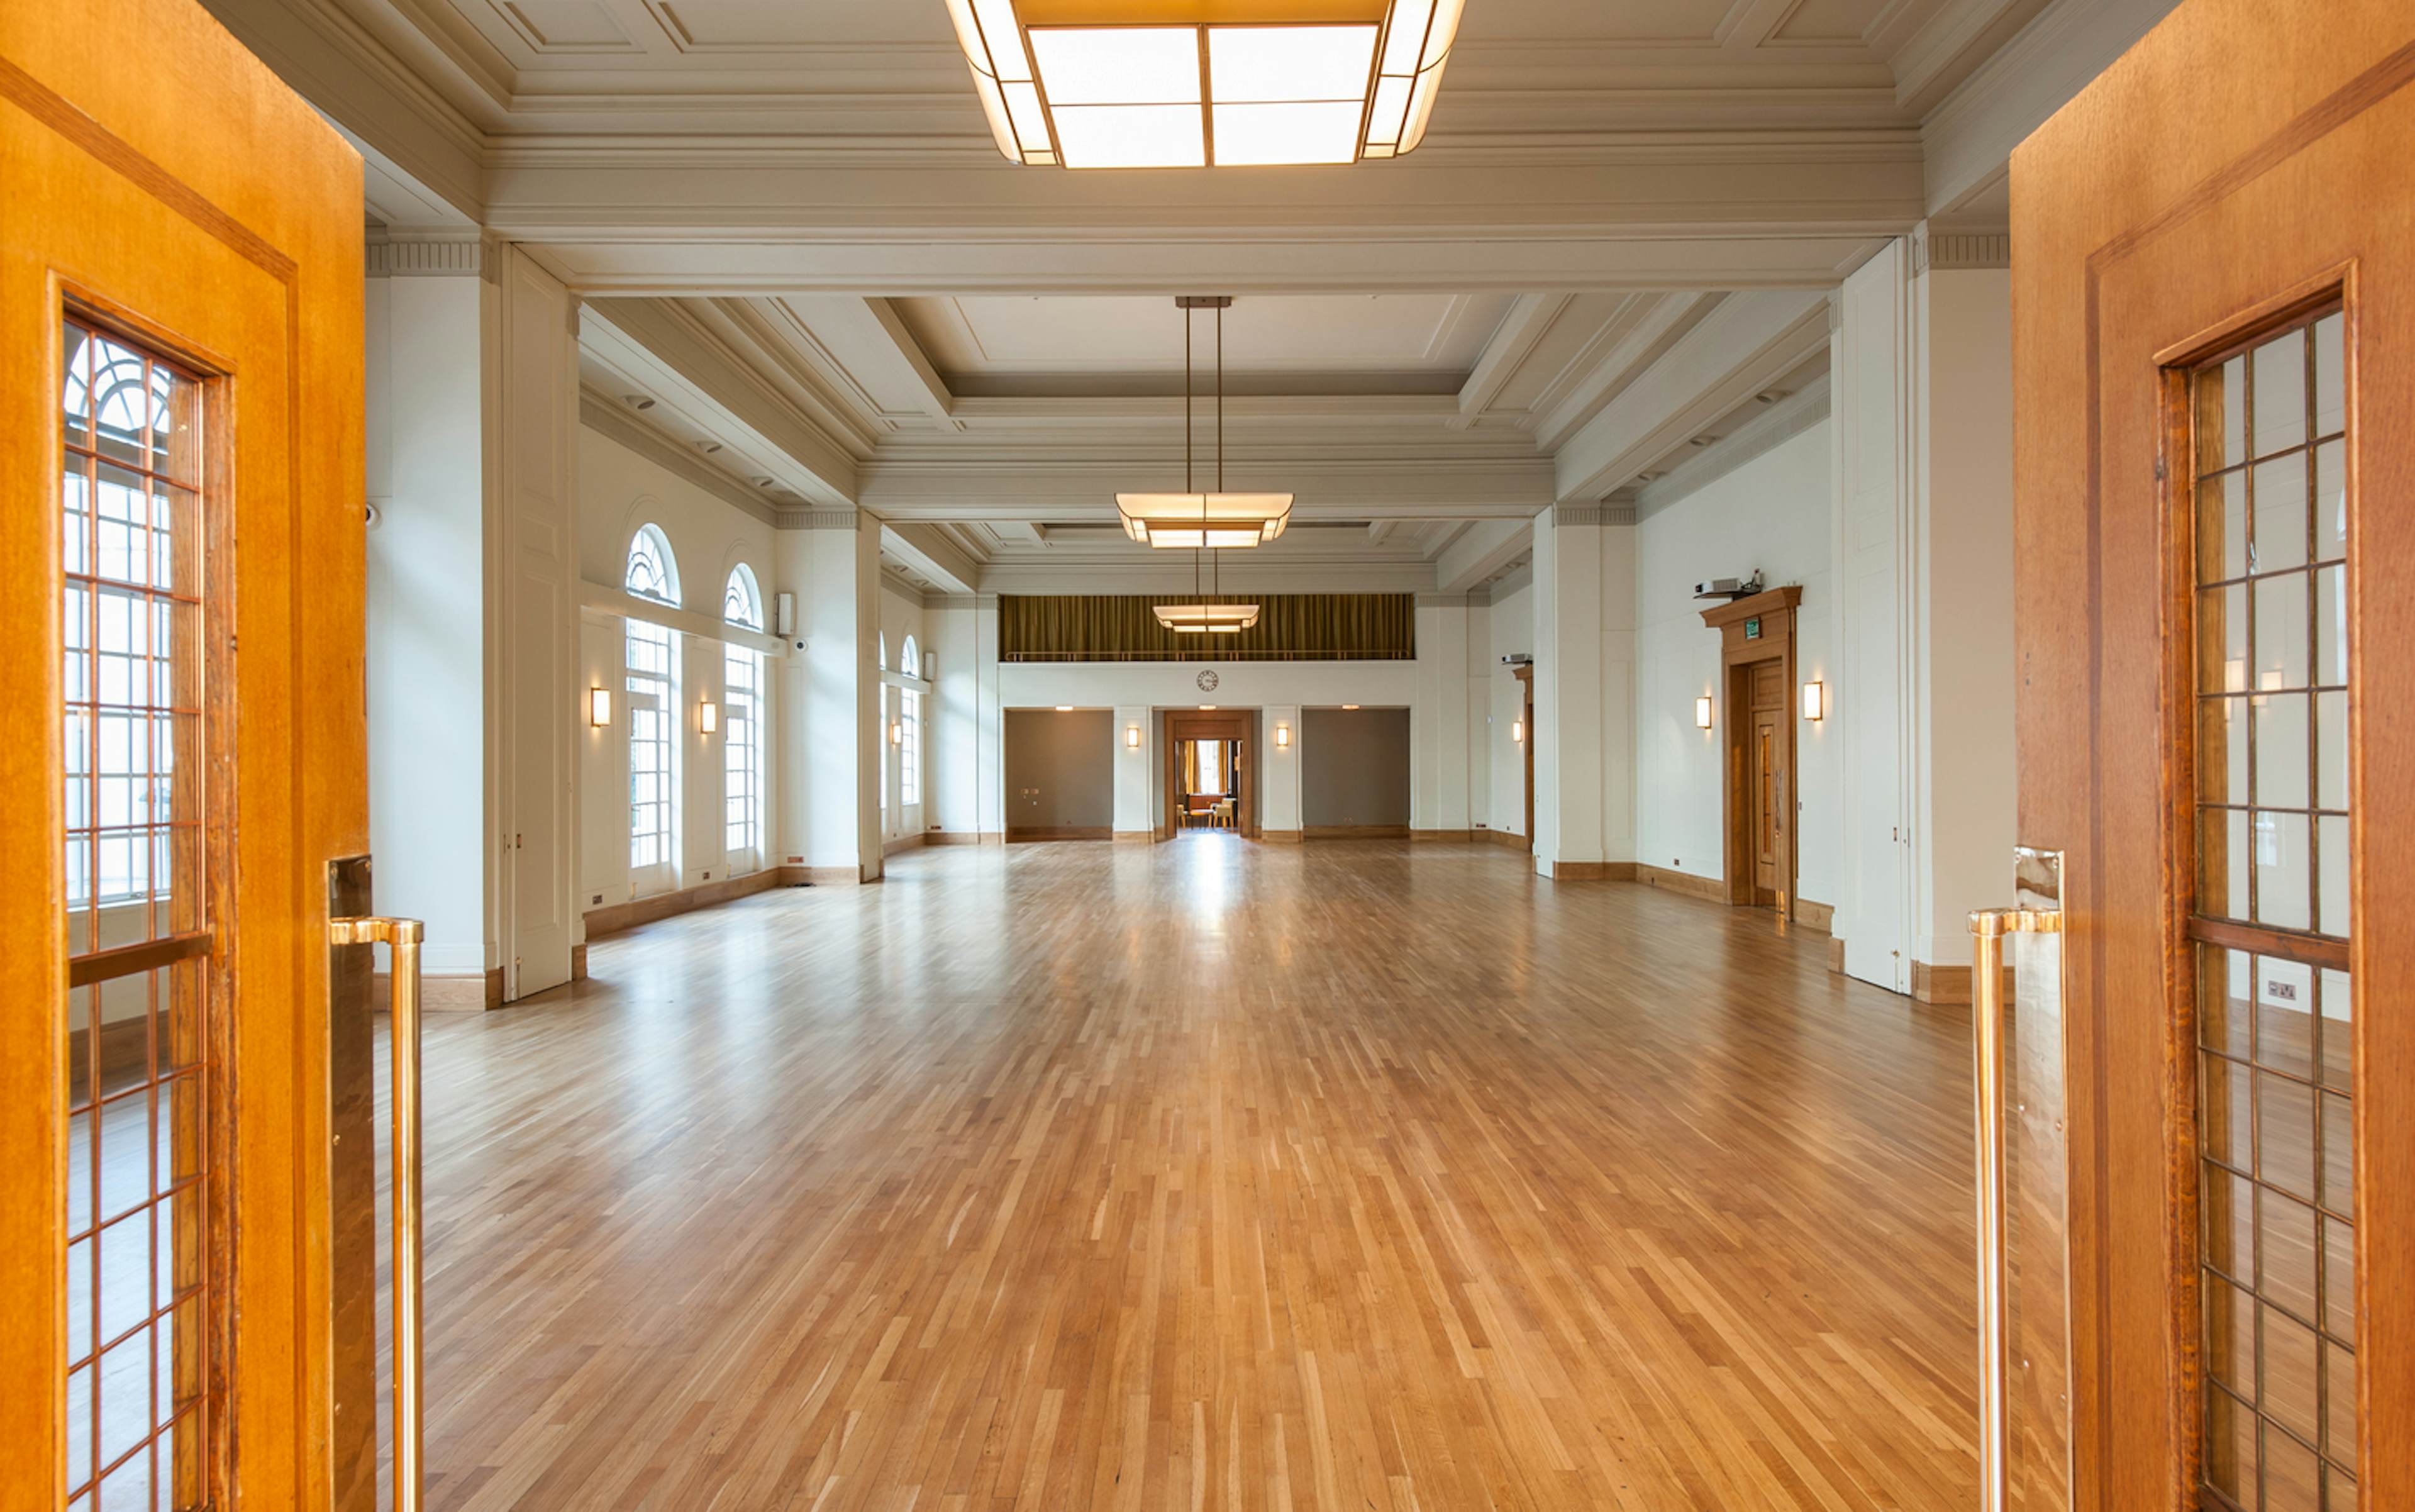 Hackney Town Hall - Assembly Hall image 1